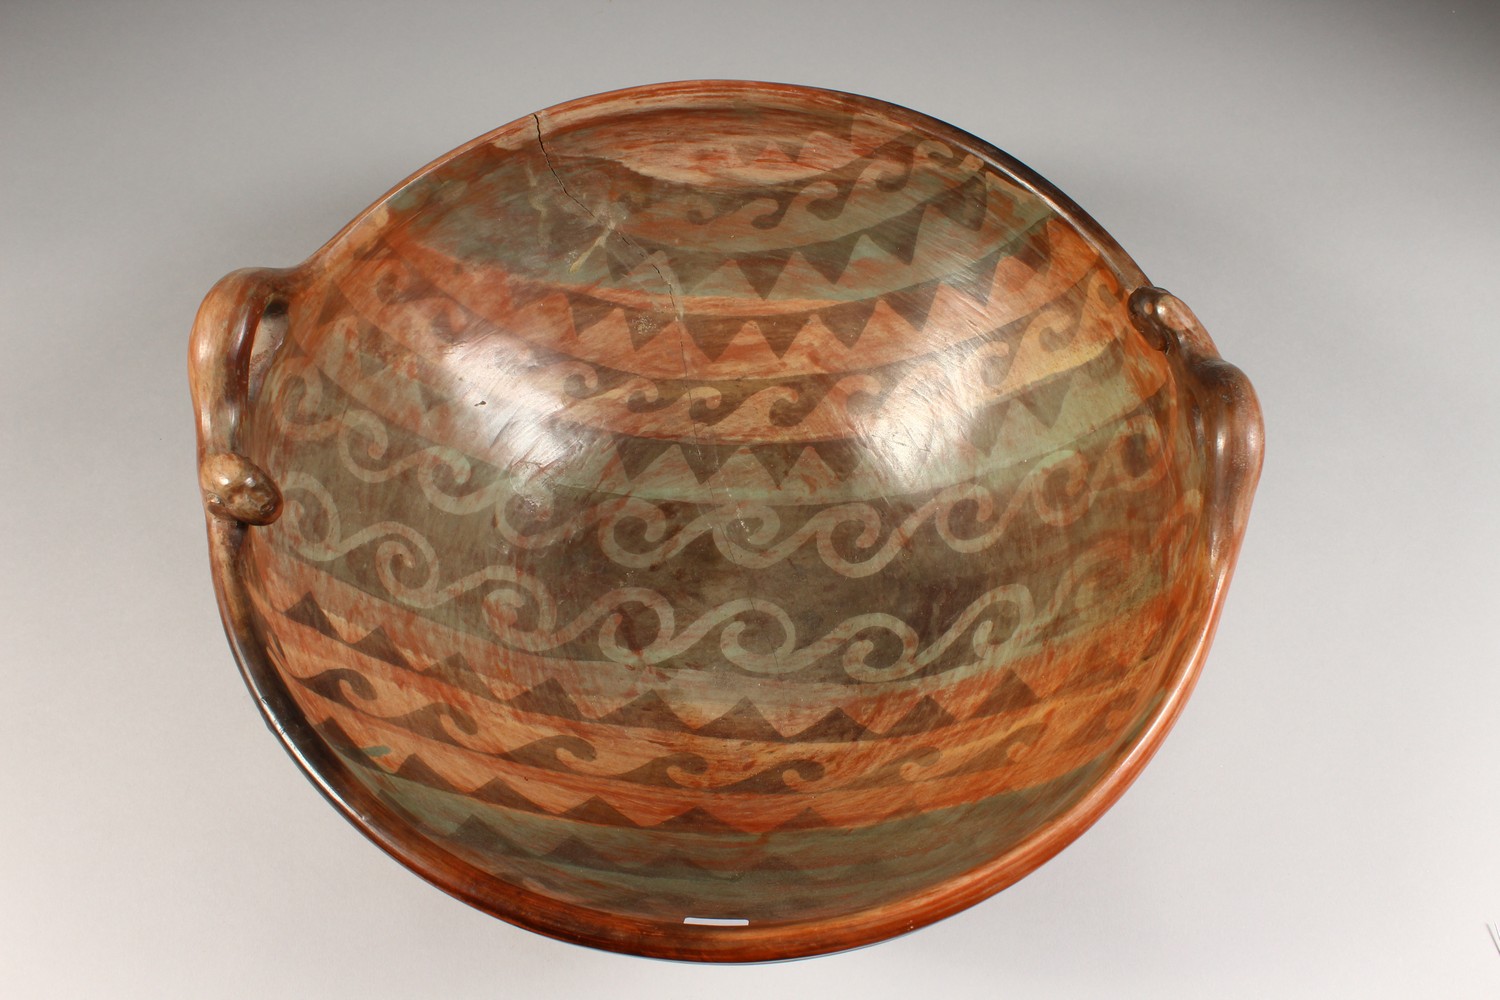 A LARGE PERUVIAN POTTERY CIRCULAR TWO-HANDLED BOWL, with wavy and zigzag pattern, signed CHULUCANAS, - Image 2 of 8